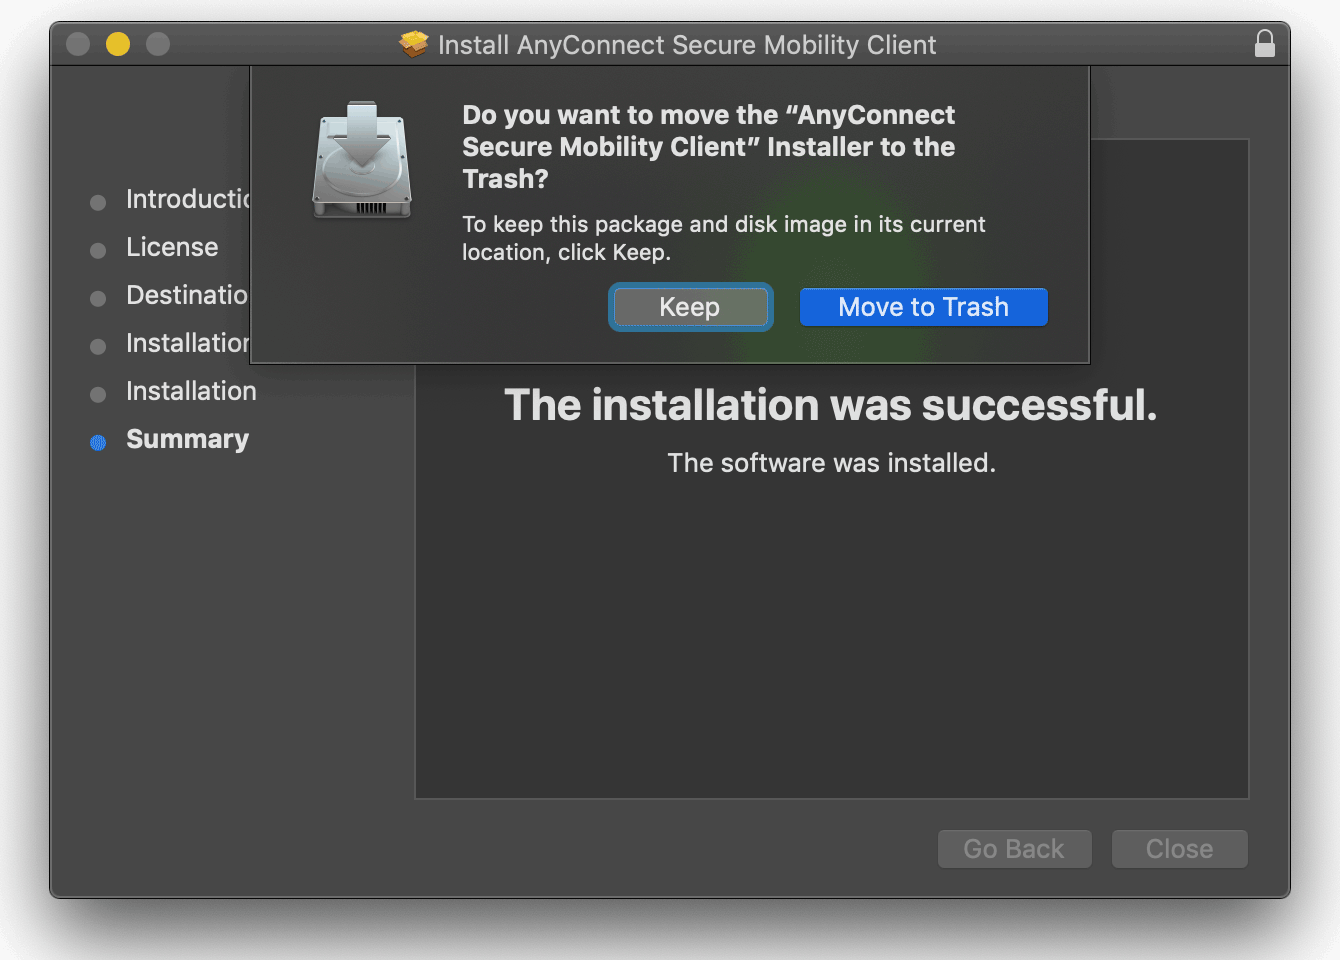 Install then move the installer to Trash